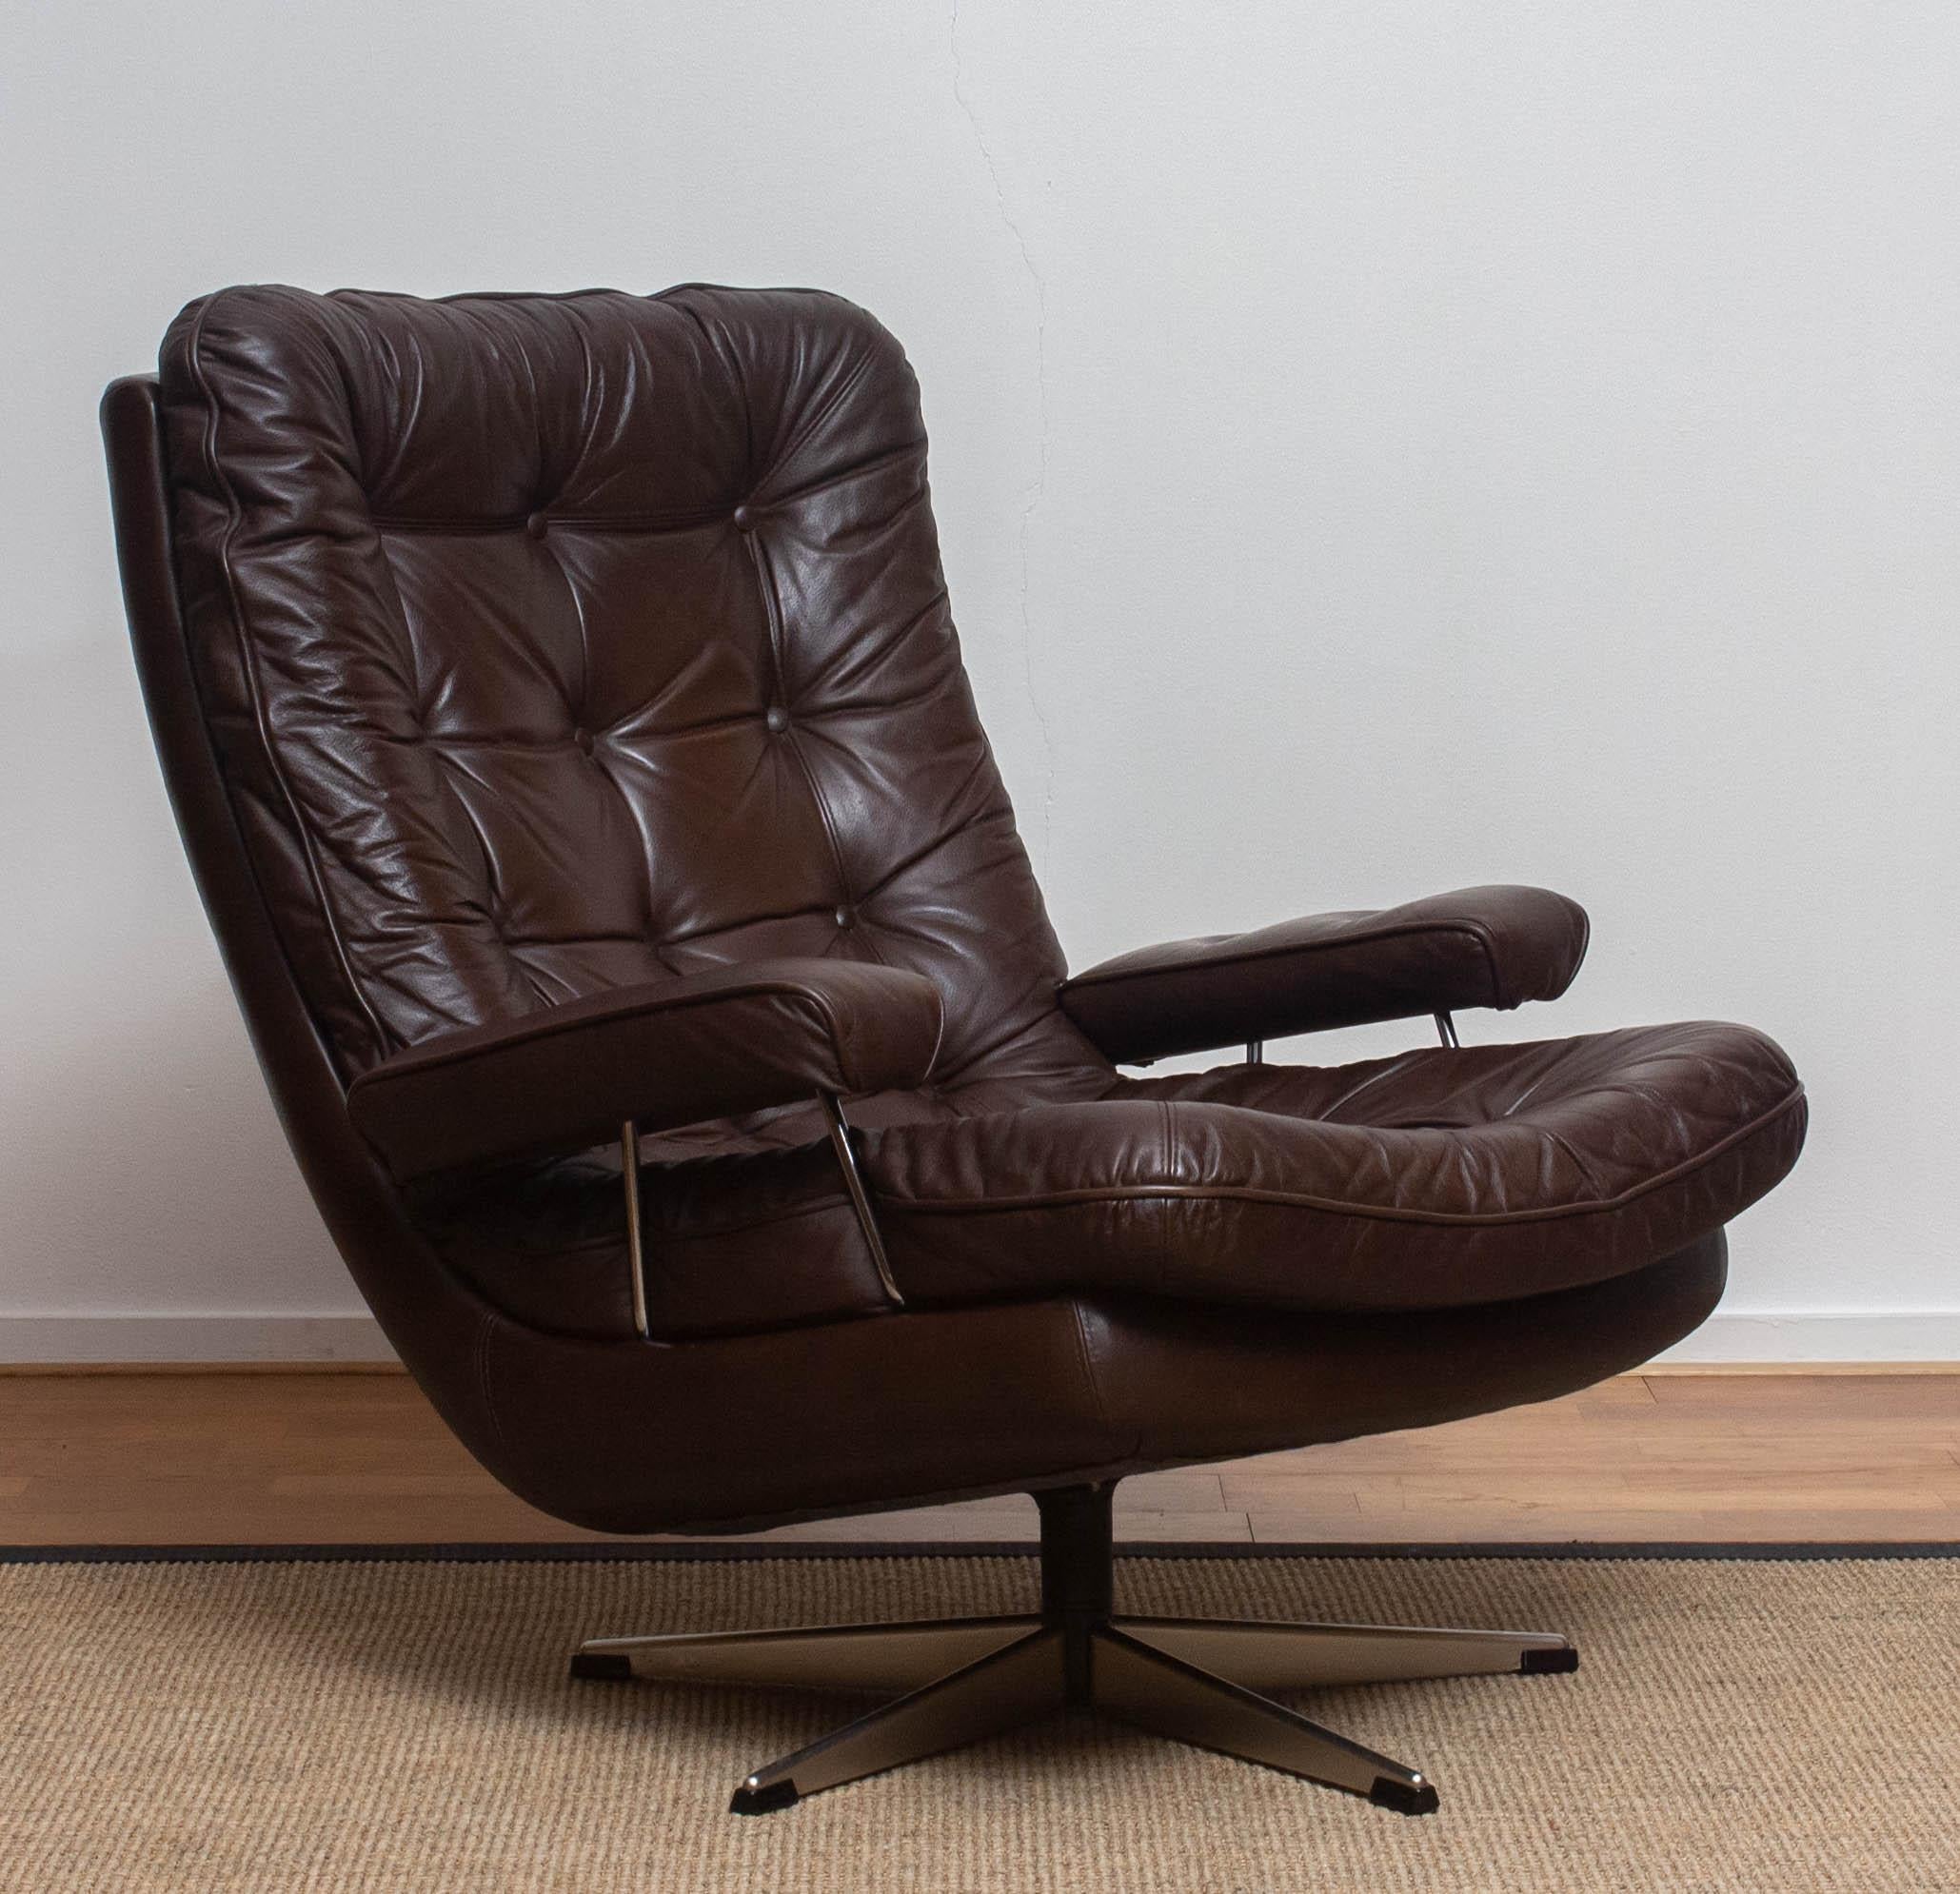 1970s, Brown Leather and Chrome Swivel Lounge Chair and Ottoman, Sweden 1